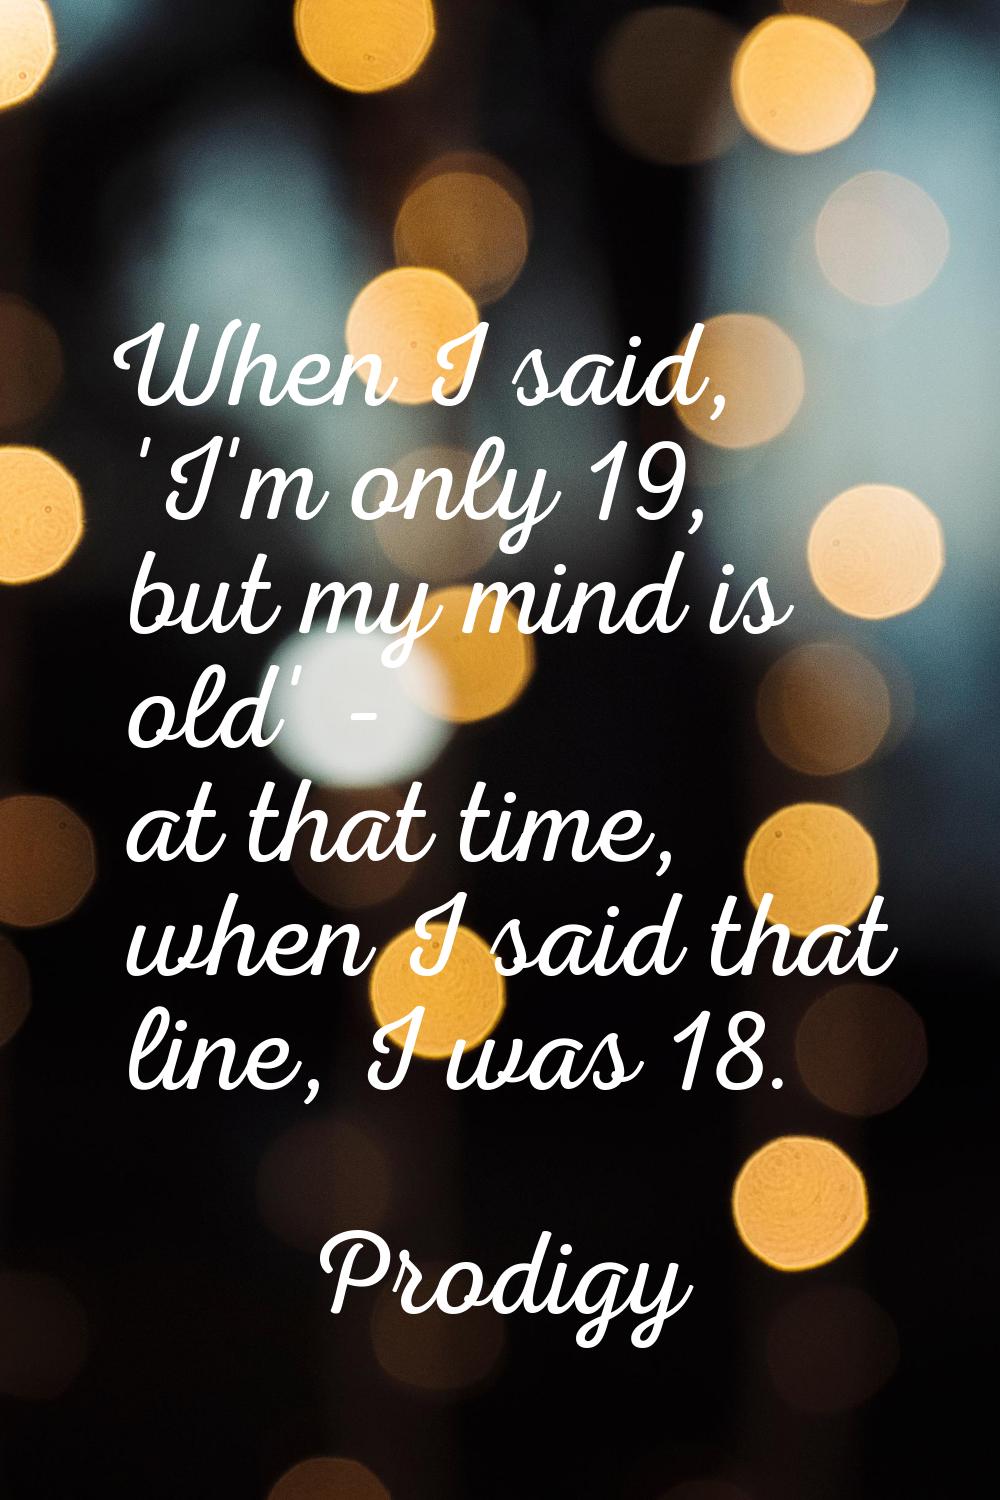 When I said, 'I'm only 19, but my mind is old' - at that time, when I said that line, I was 18.